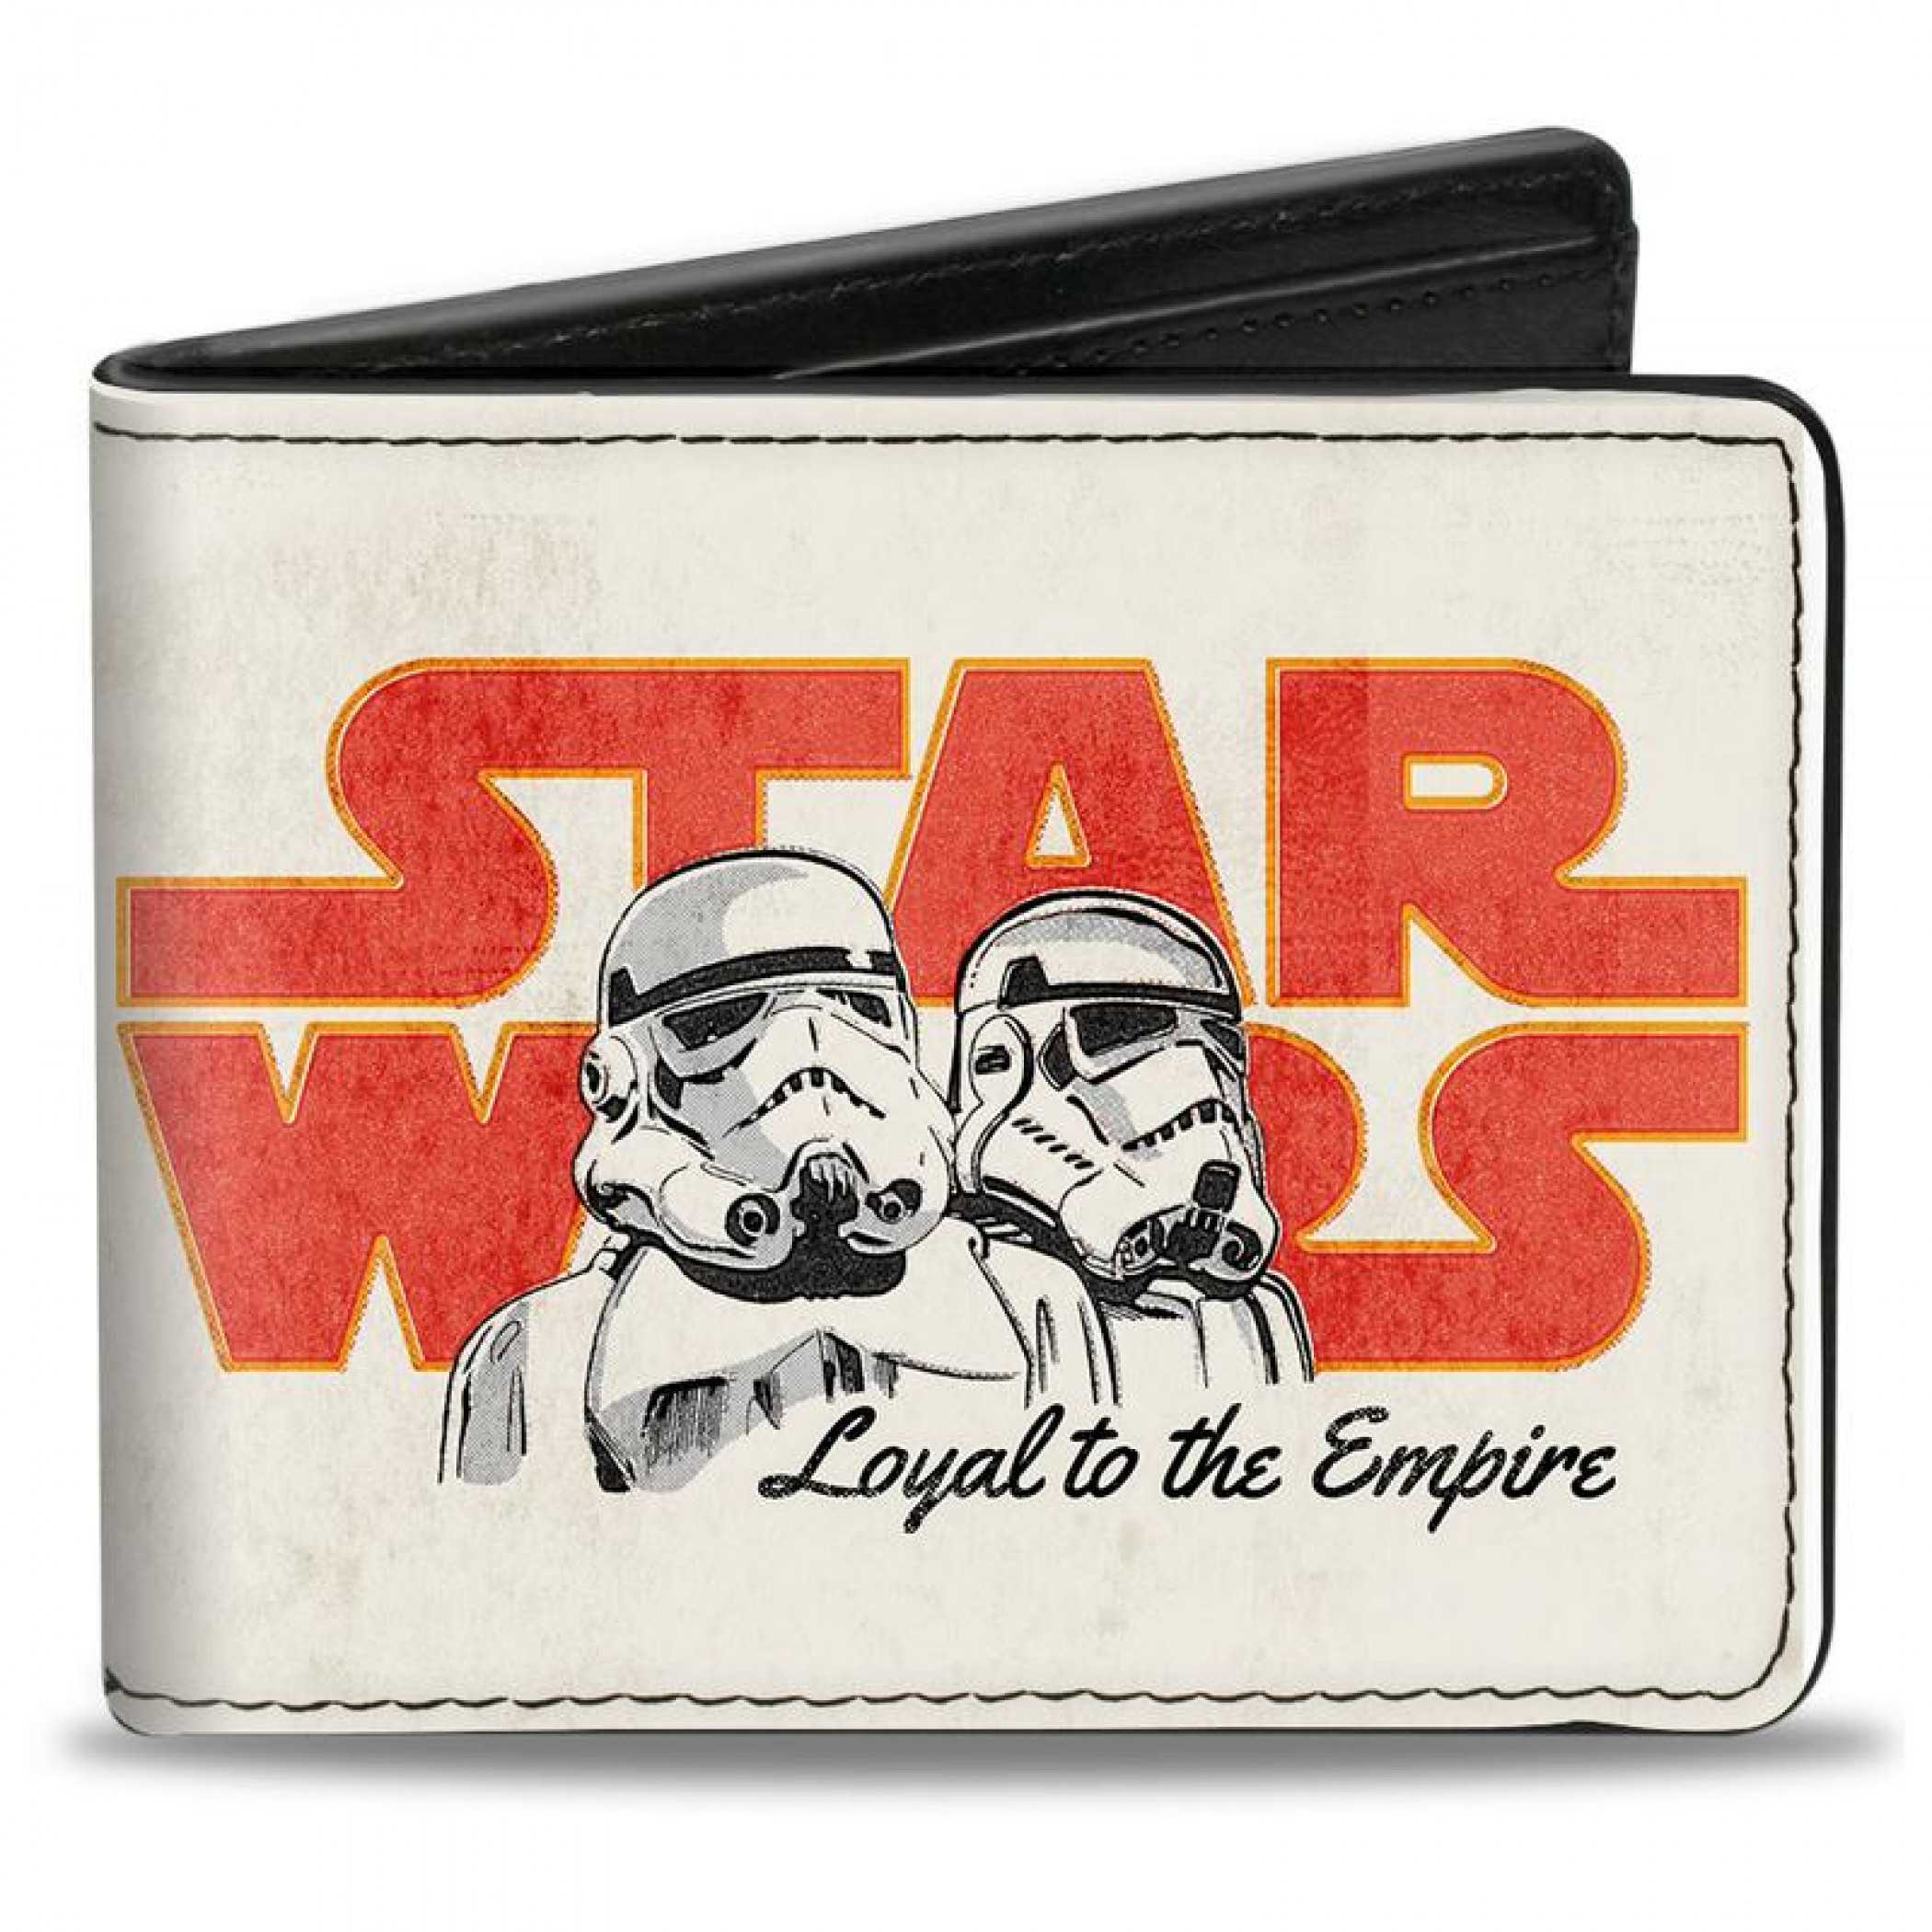 Star Wars Stormtroopers Loyal To The Empire Bi-Fold Wallet